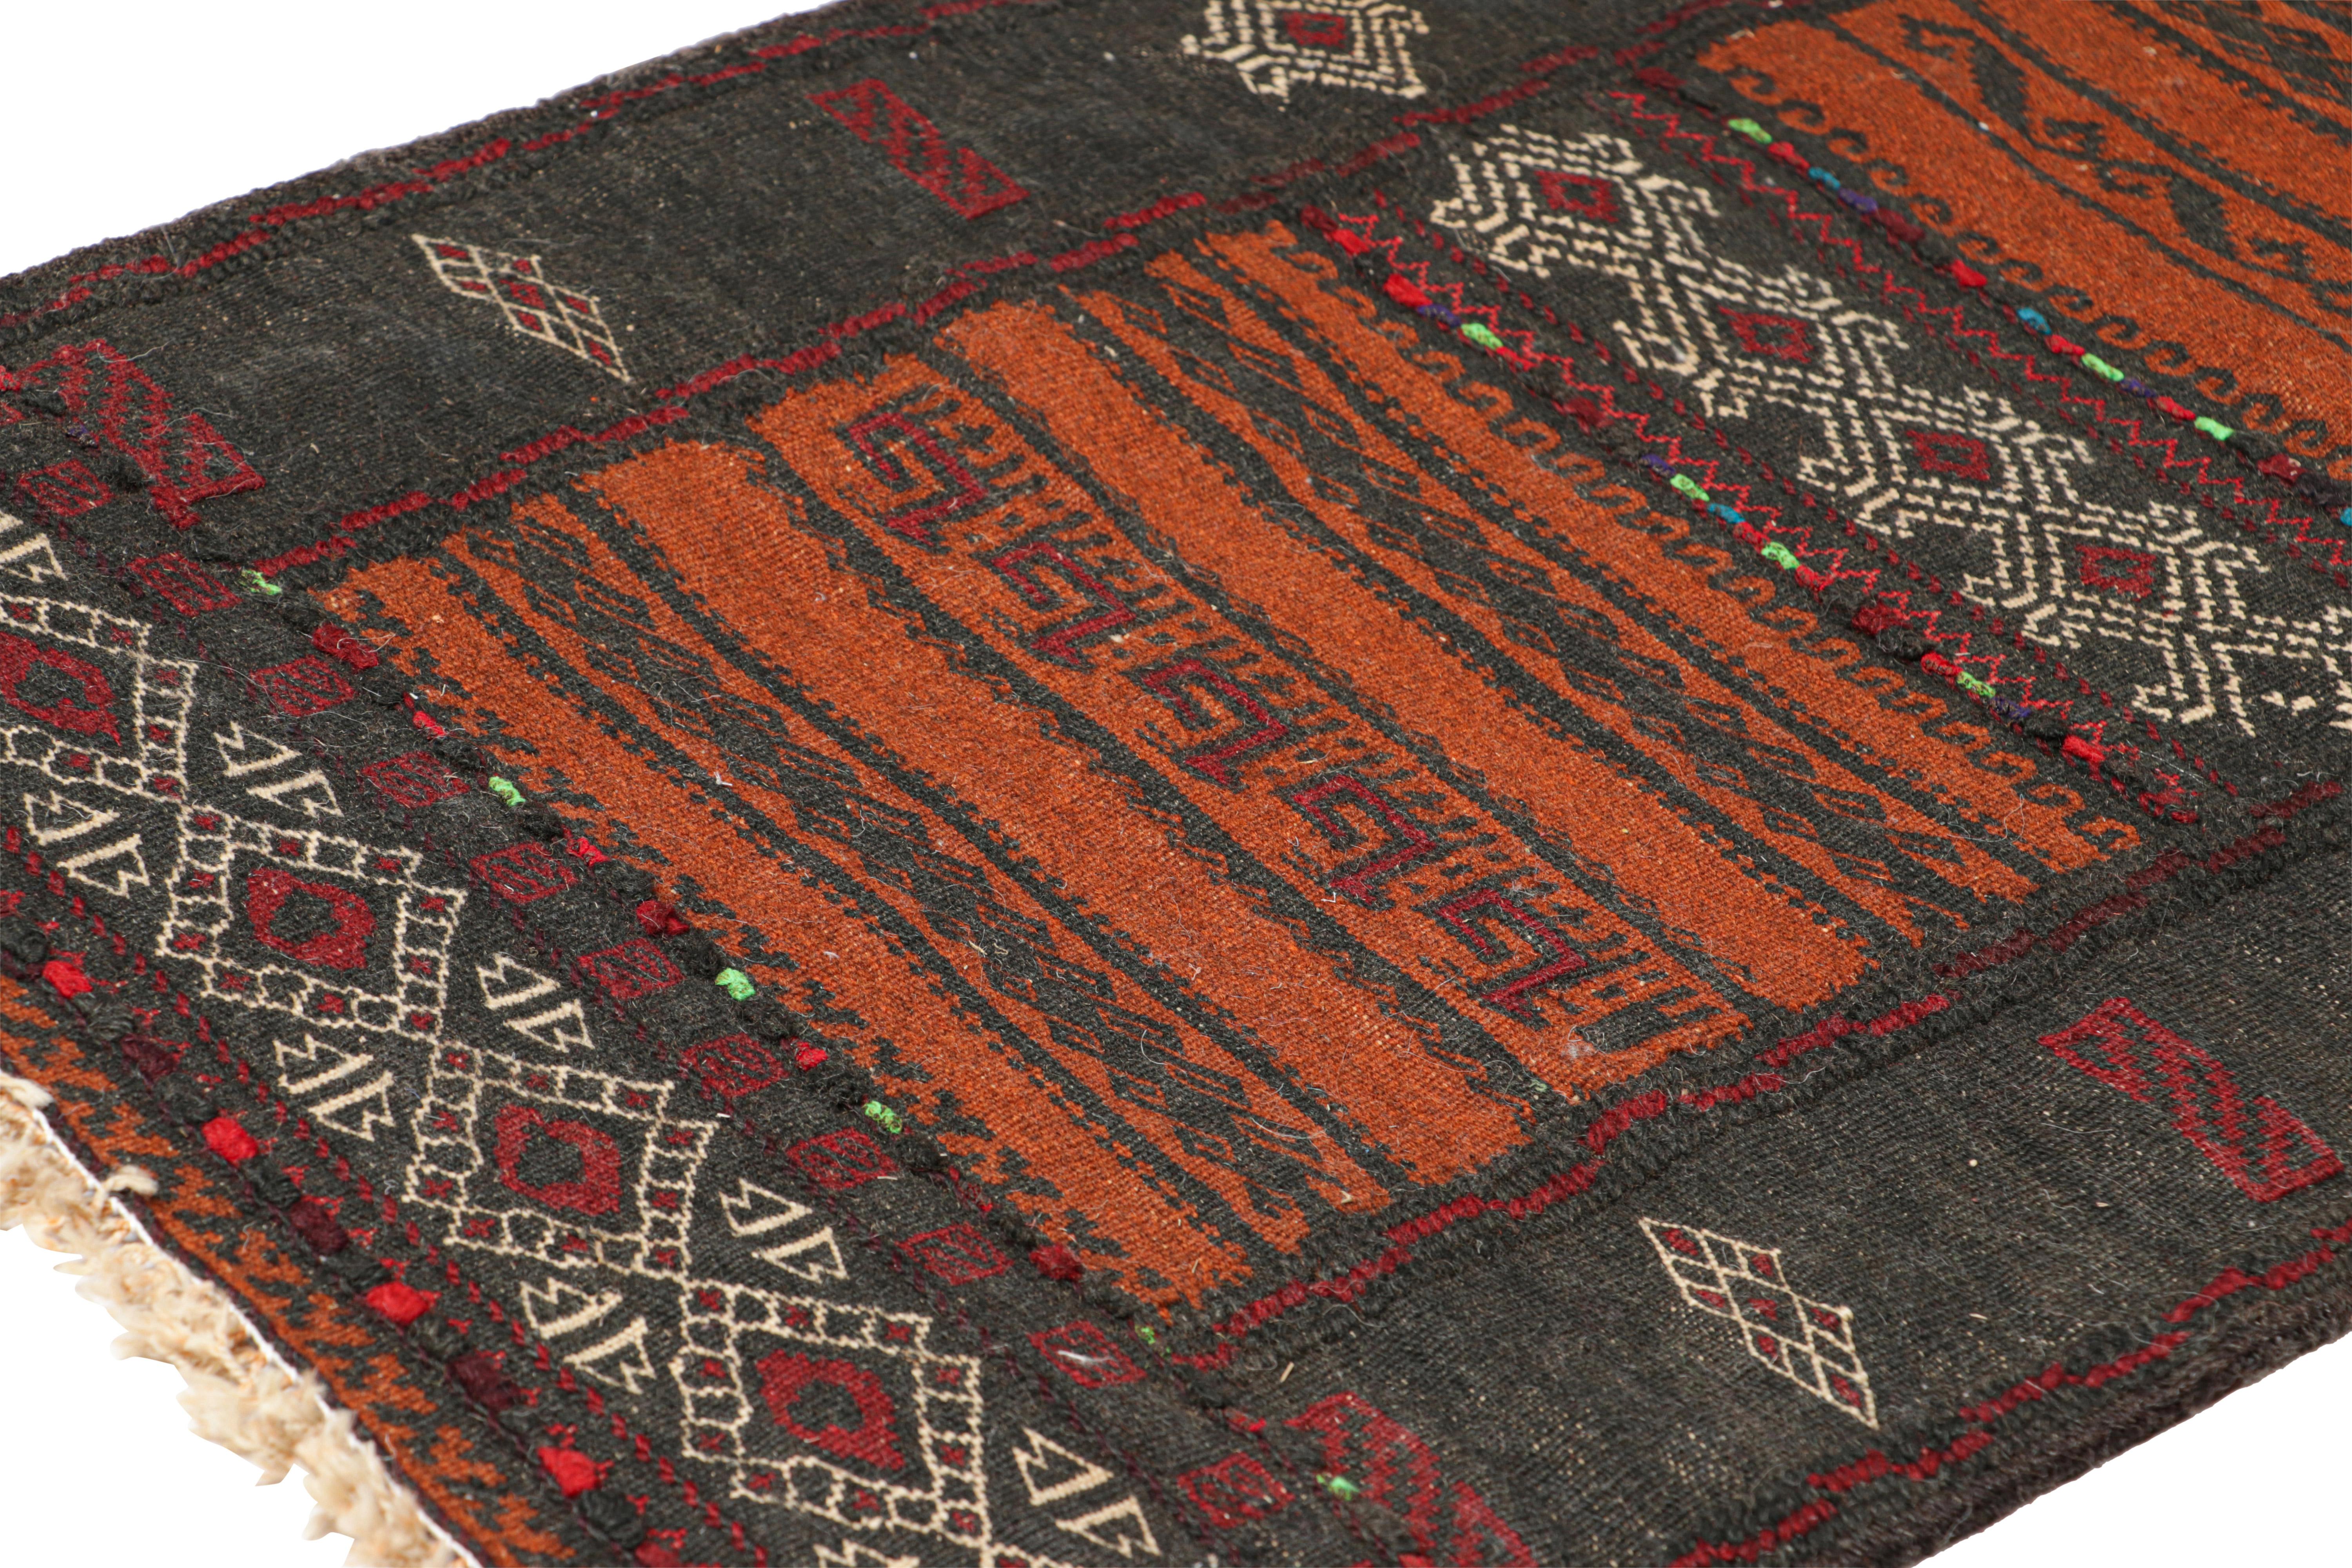 Hand-Woven Vintage Afghan Kilim with Polychromatic Geometric Patterns, from Rug & Kilim For Sale